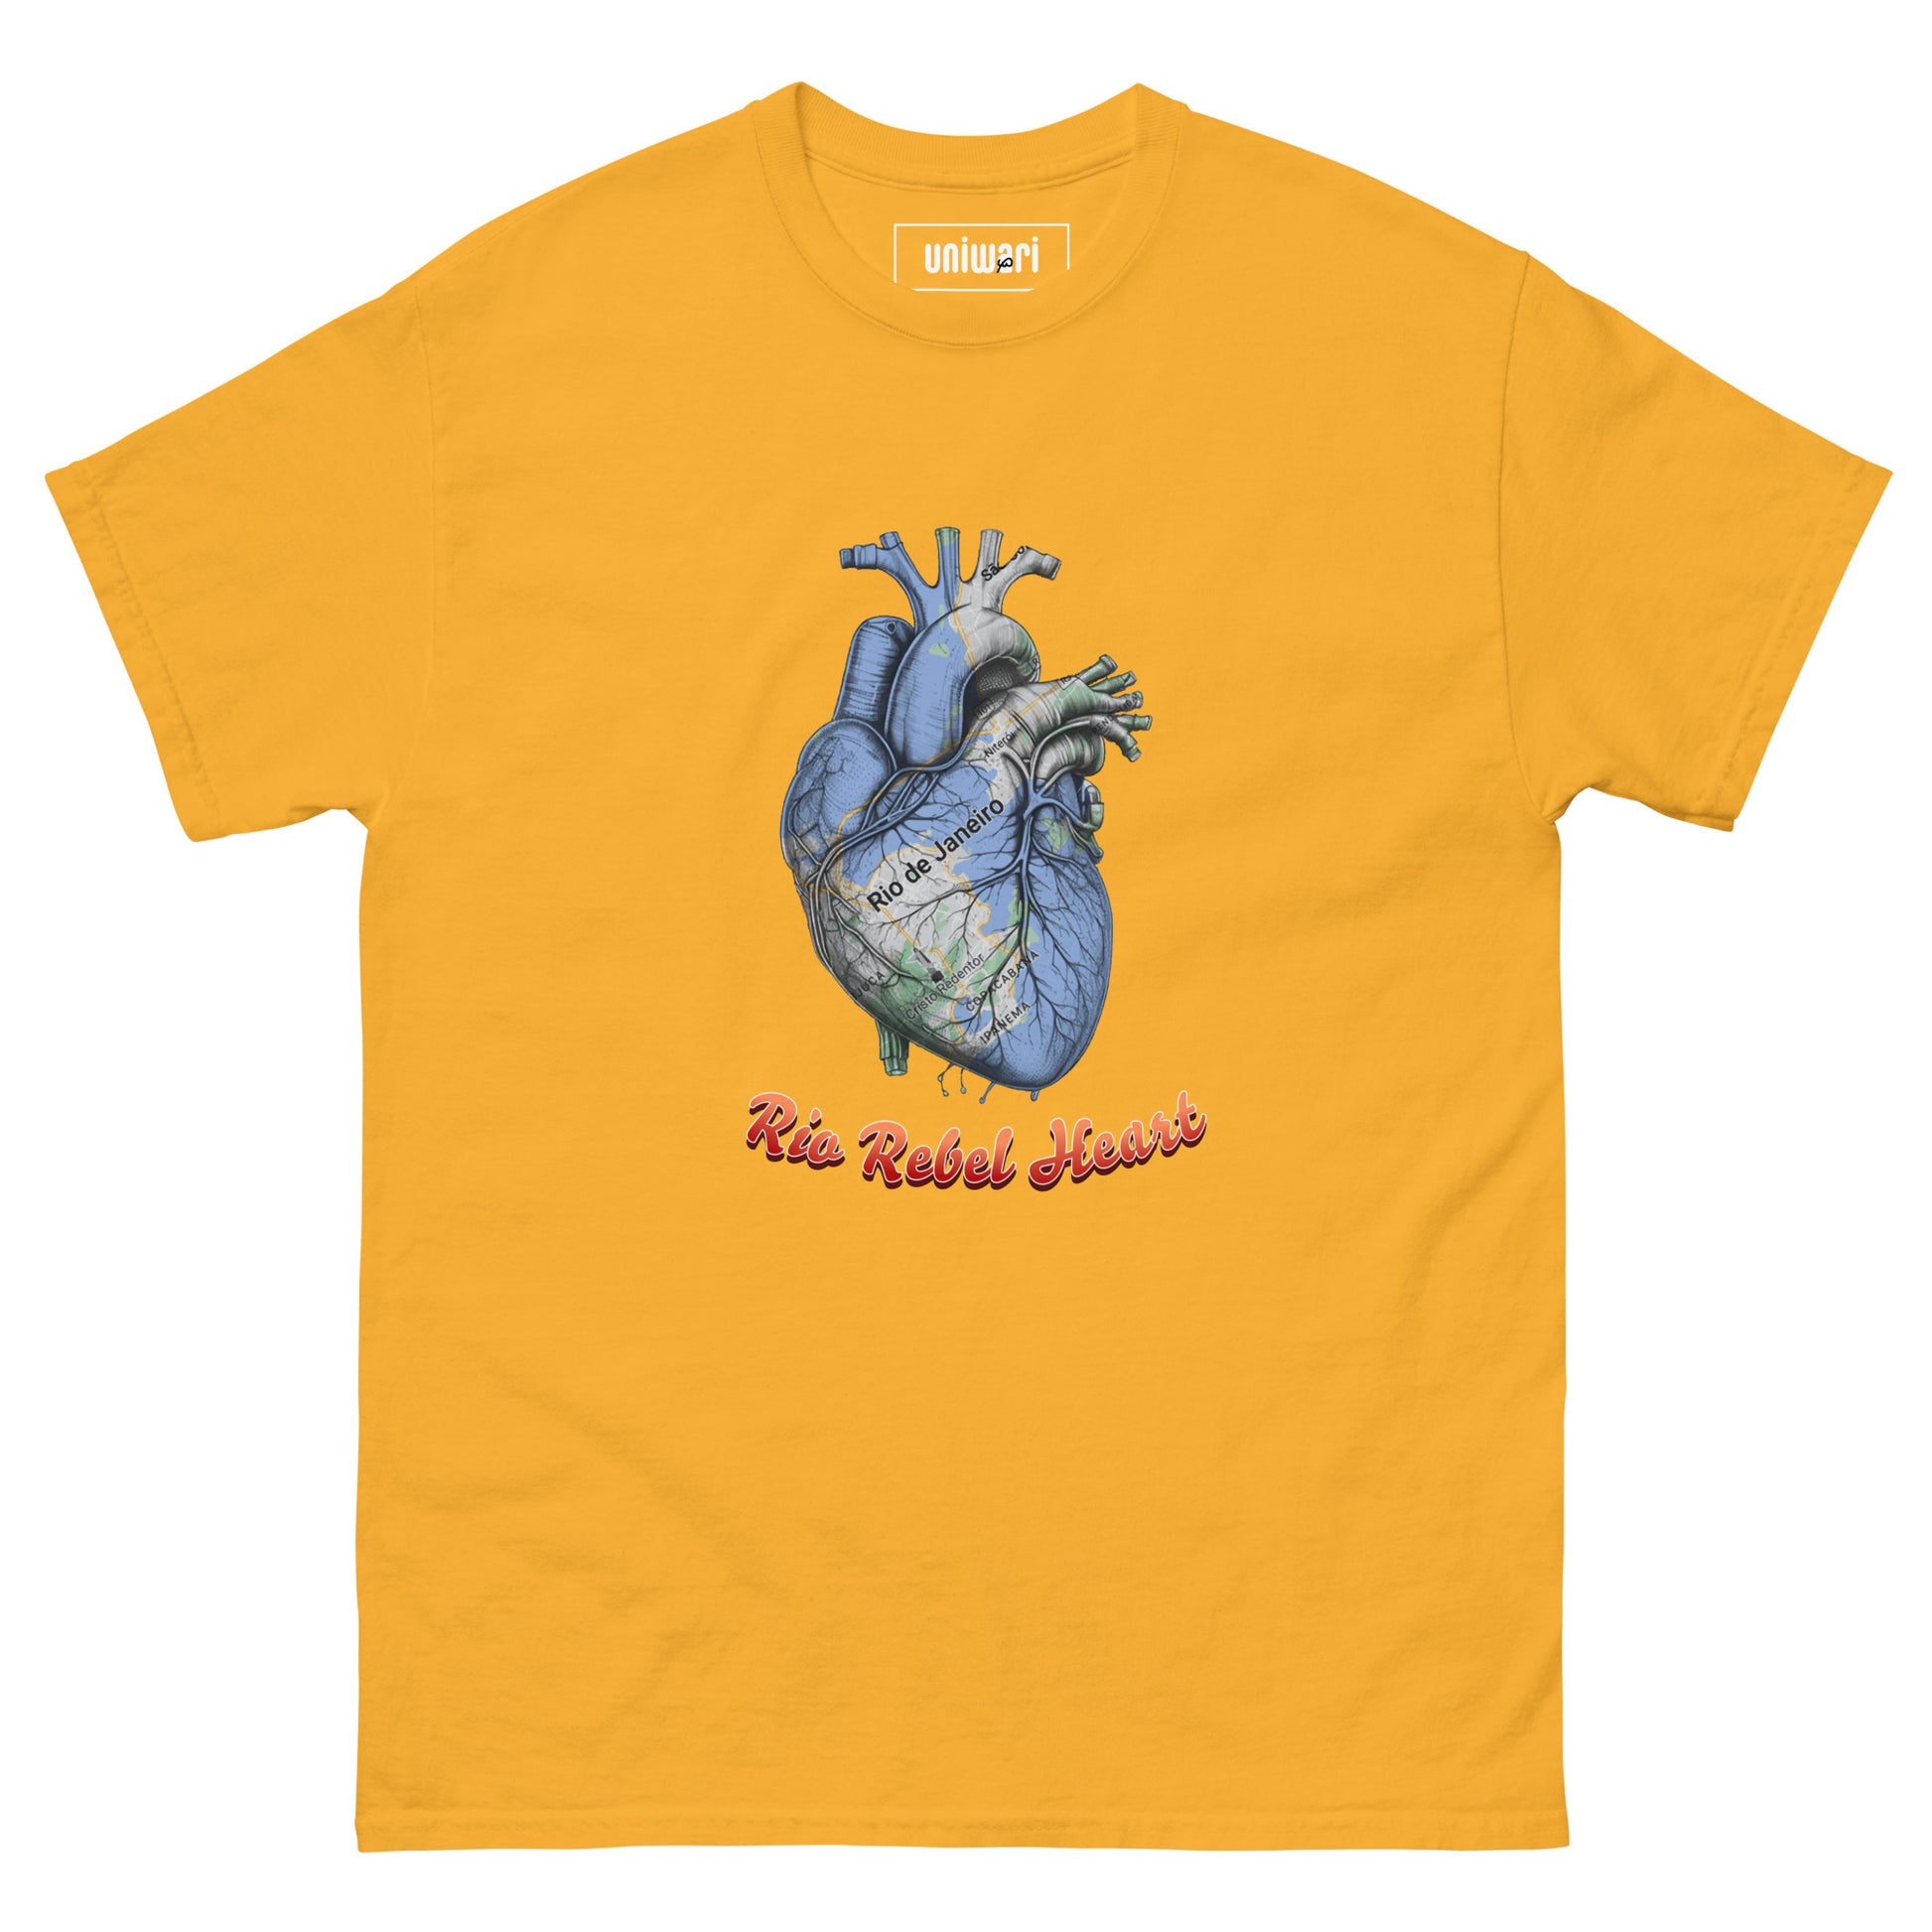 Yellow High Quality Tee - Front Design with a Heart Shaped Map of Rio de Janeiro and a Phrase "Rio Rebel Heart" print